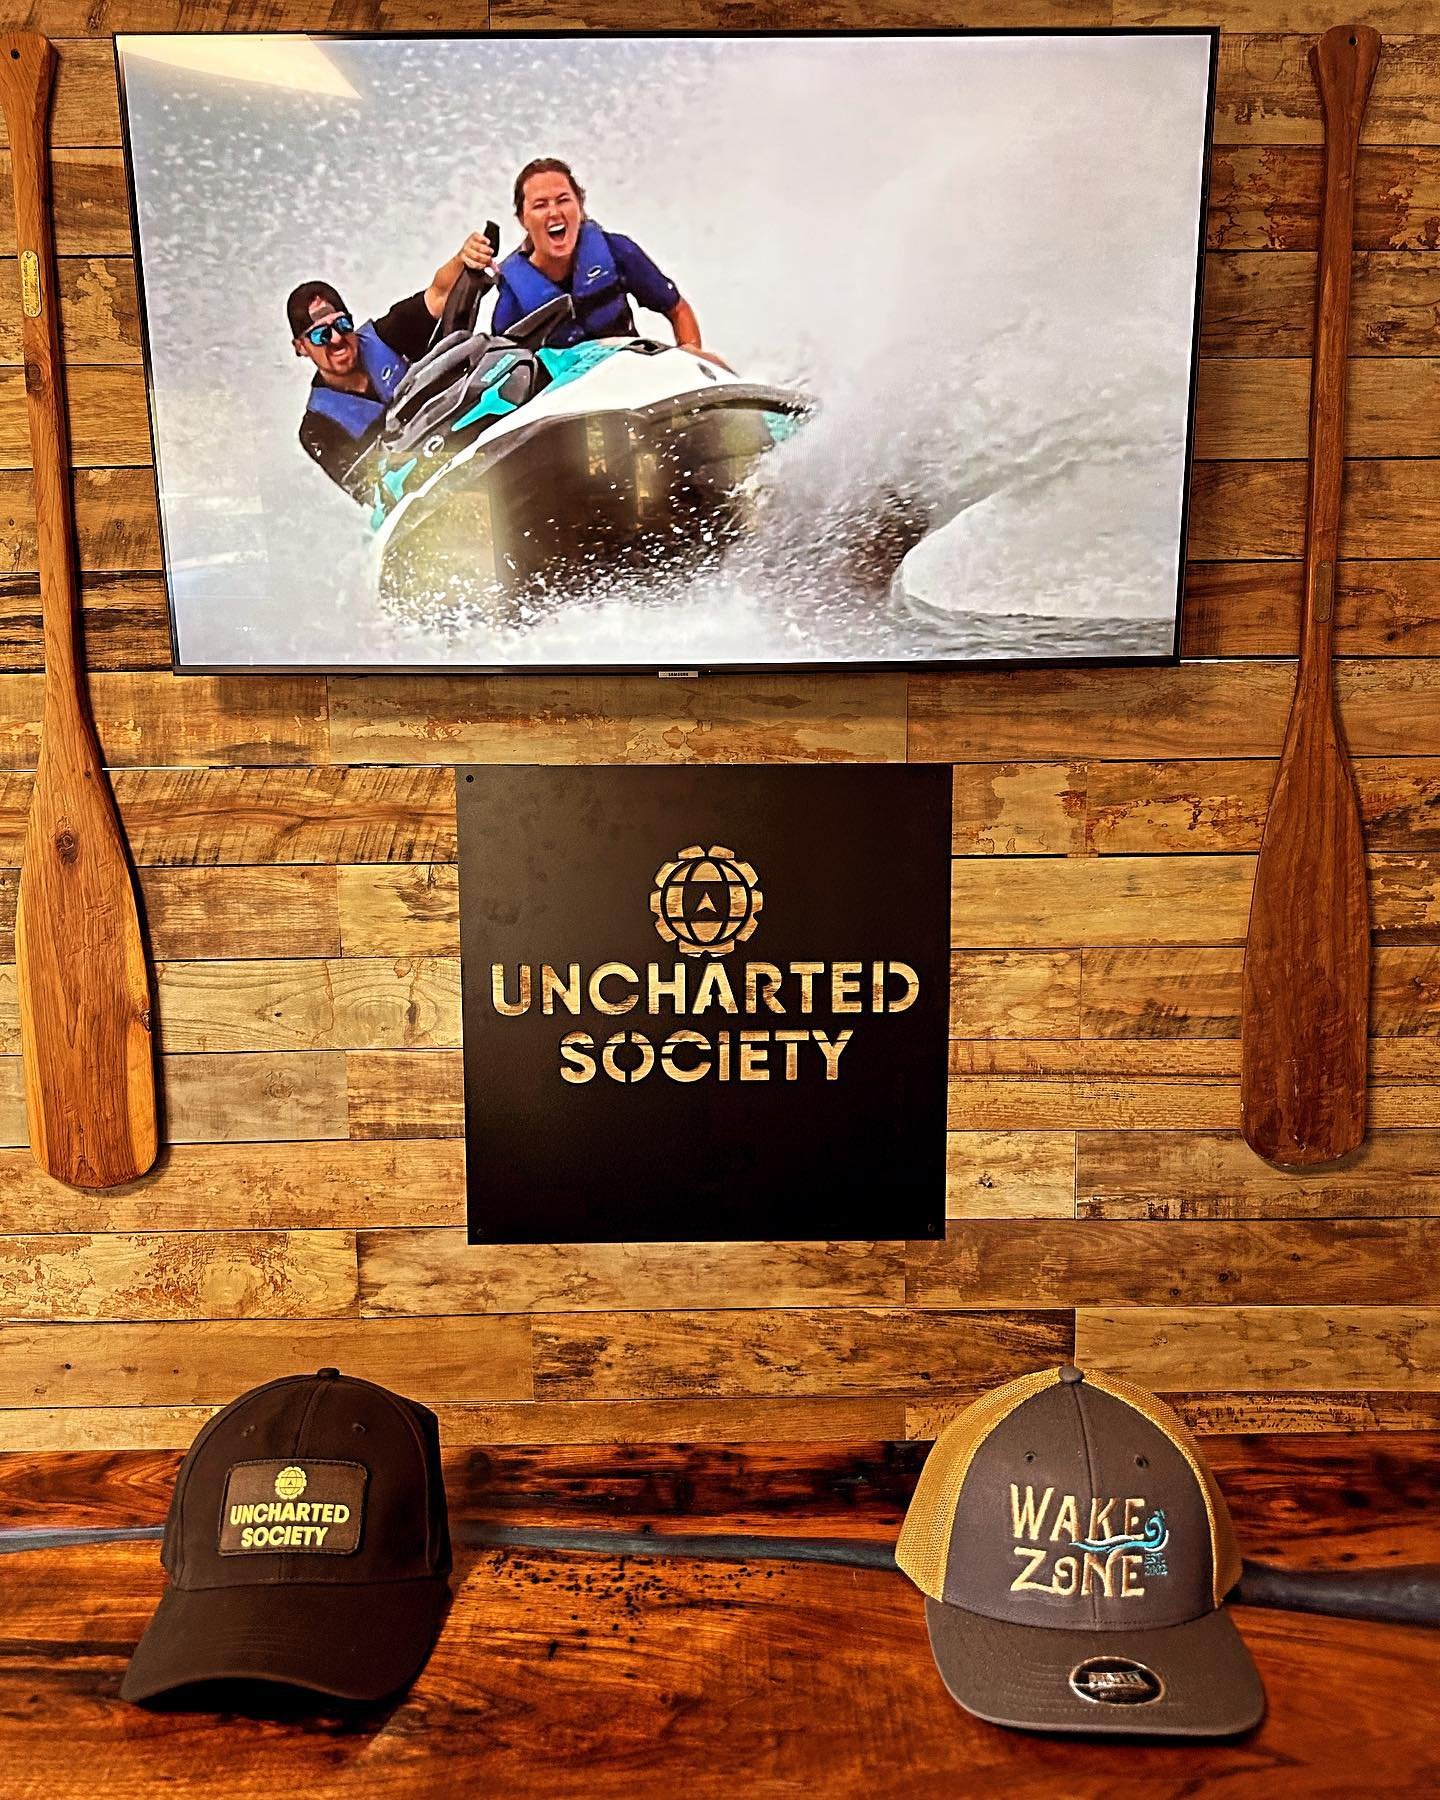 Beyond excited to announce that Wake Zone is now a proud partner of the Uncharted Society, BRP&rsquo;s experience partnership program!  Featuring the top outfitters in the industry and 200+ unique experiences around the world, the Uncharted Society i